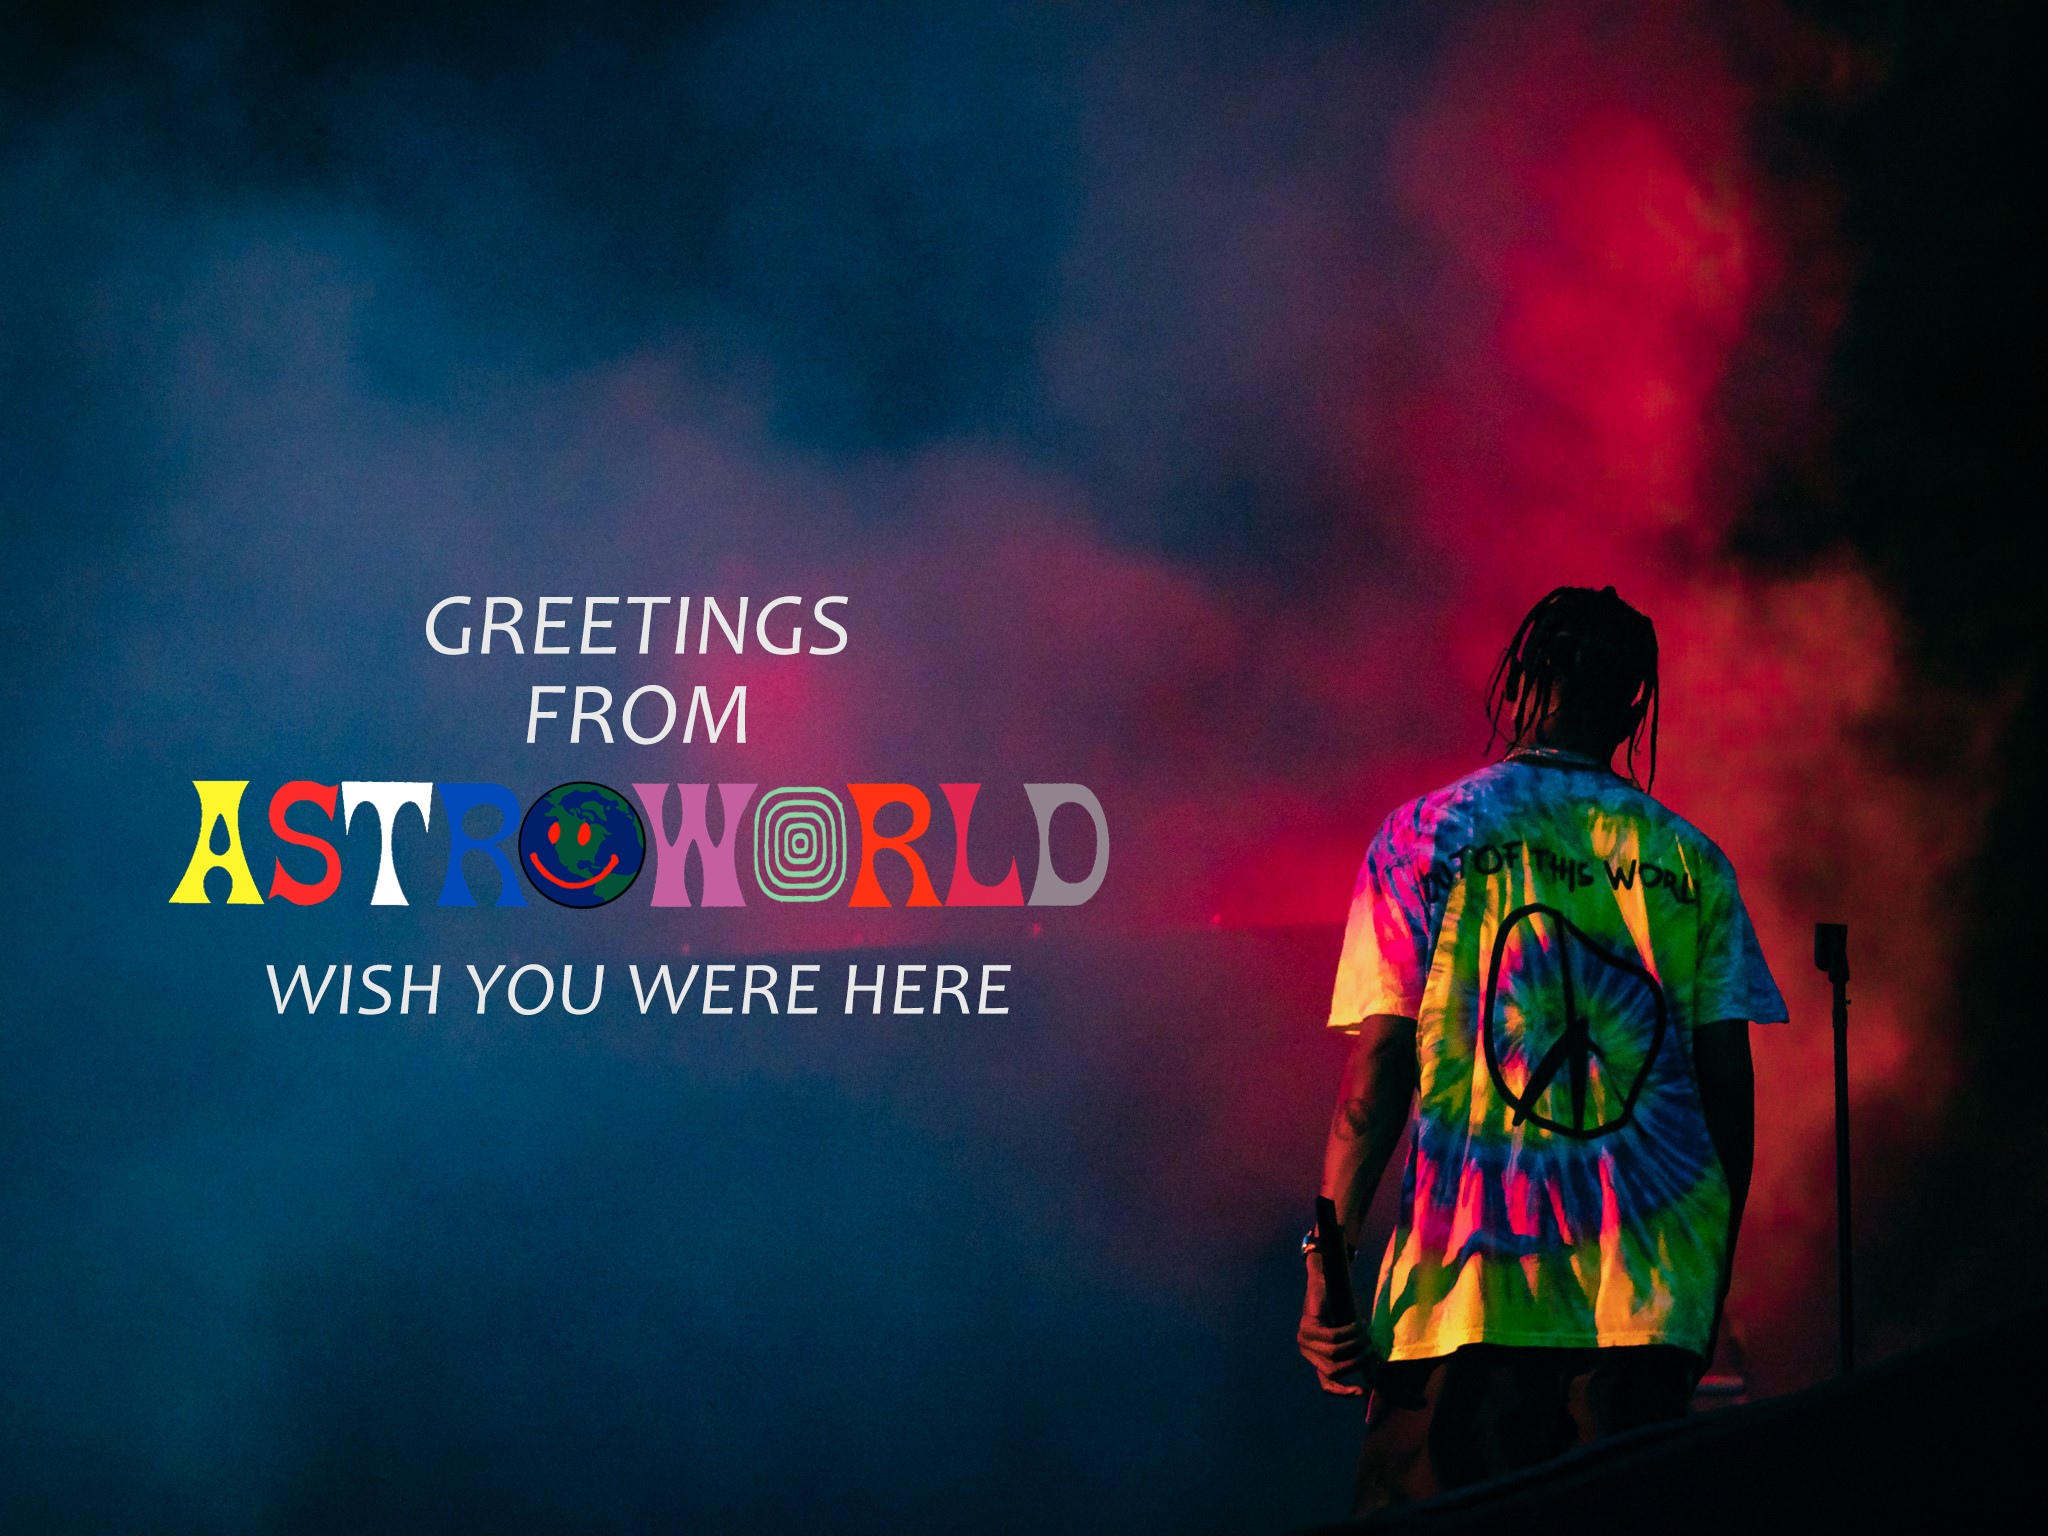 You can also upload and share your favorite Astroworld Wish You Were Here d...